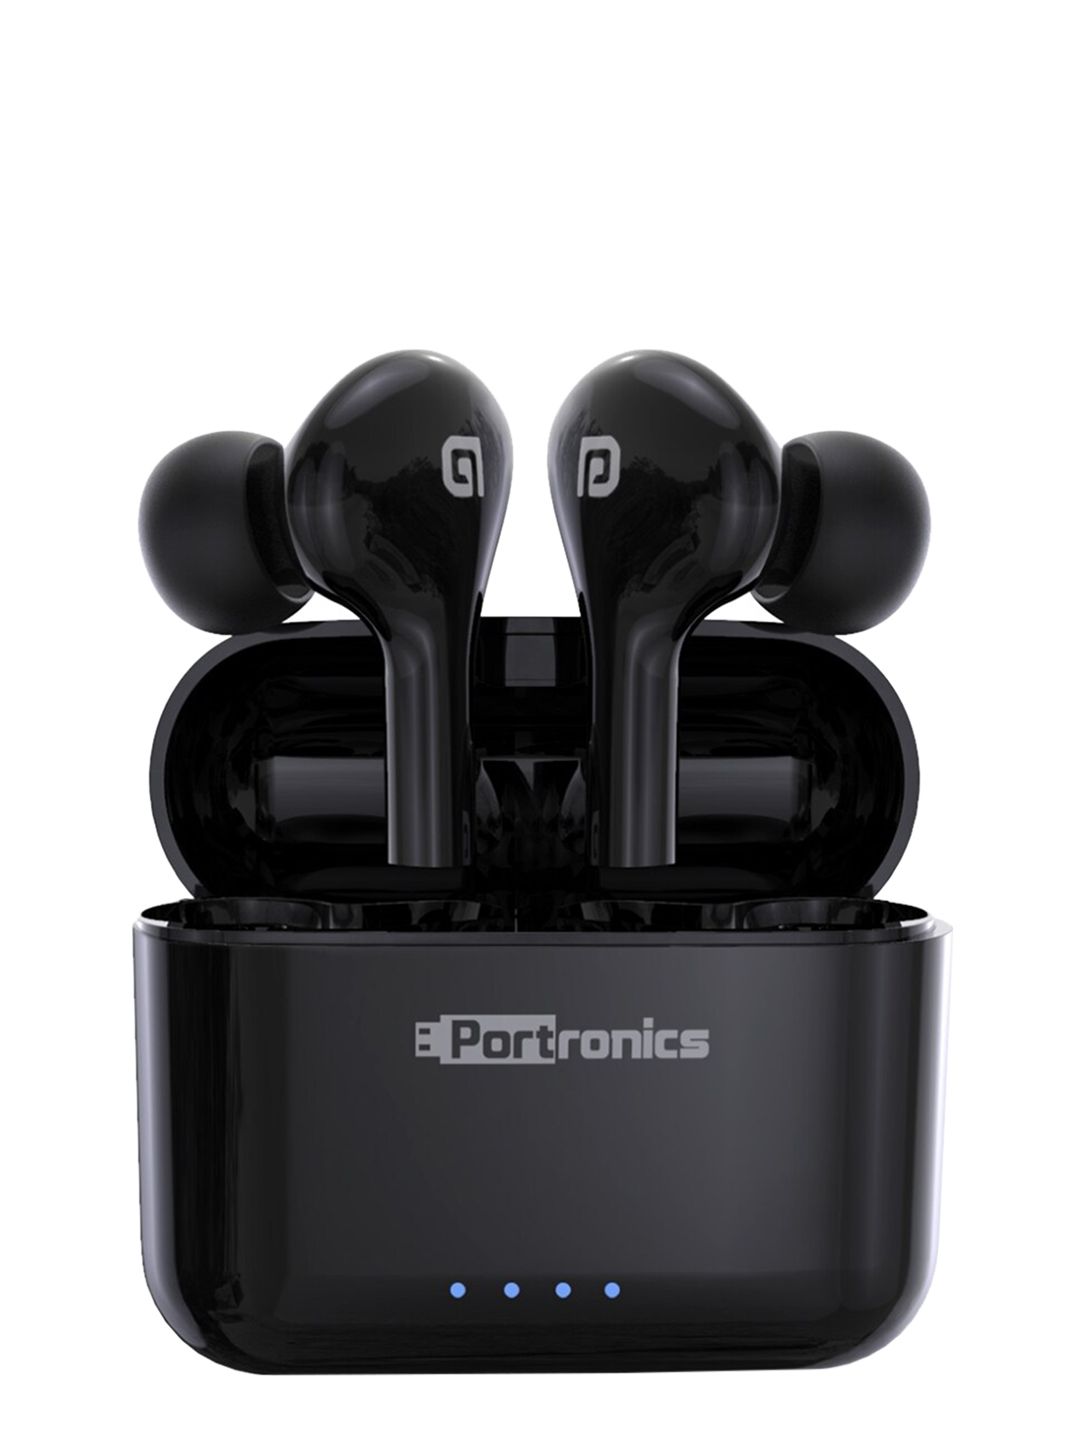 Portronics Adults Black Twins 33 Smart Truly Wireless Bluetooth In-Ear Earbuds with Mic Price in India